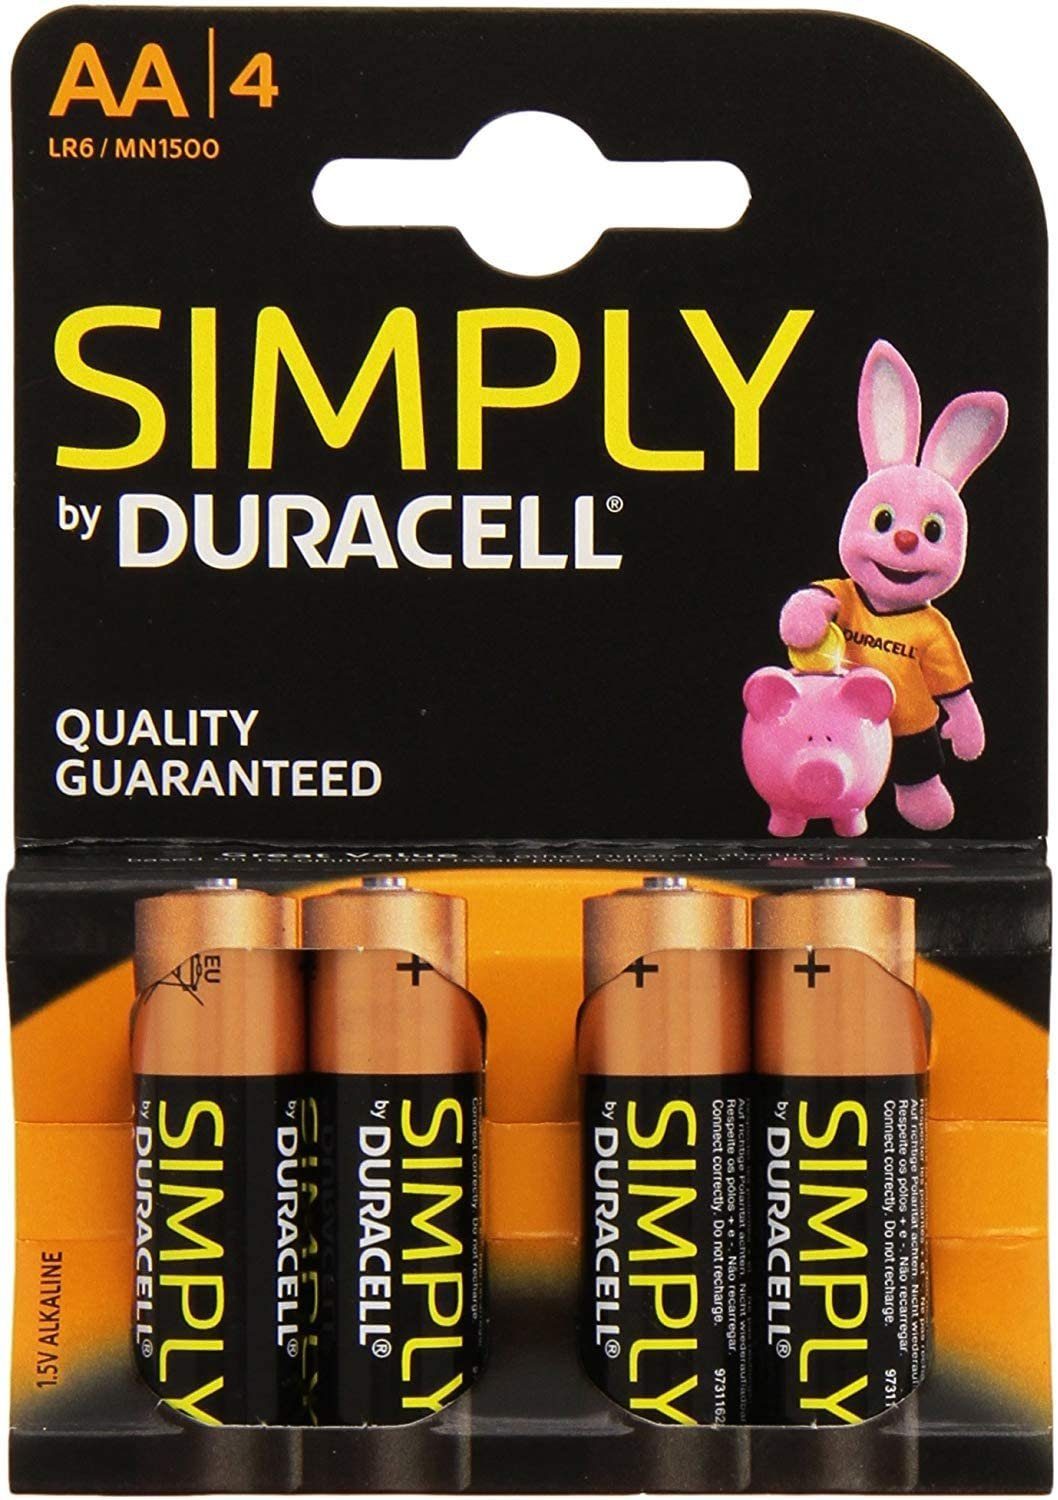 Duracell Batterie Alkali 1.5 V Duracell Simply 4 Pack AA